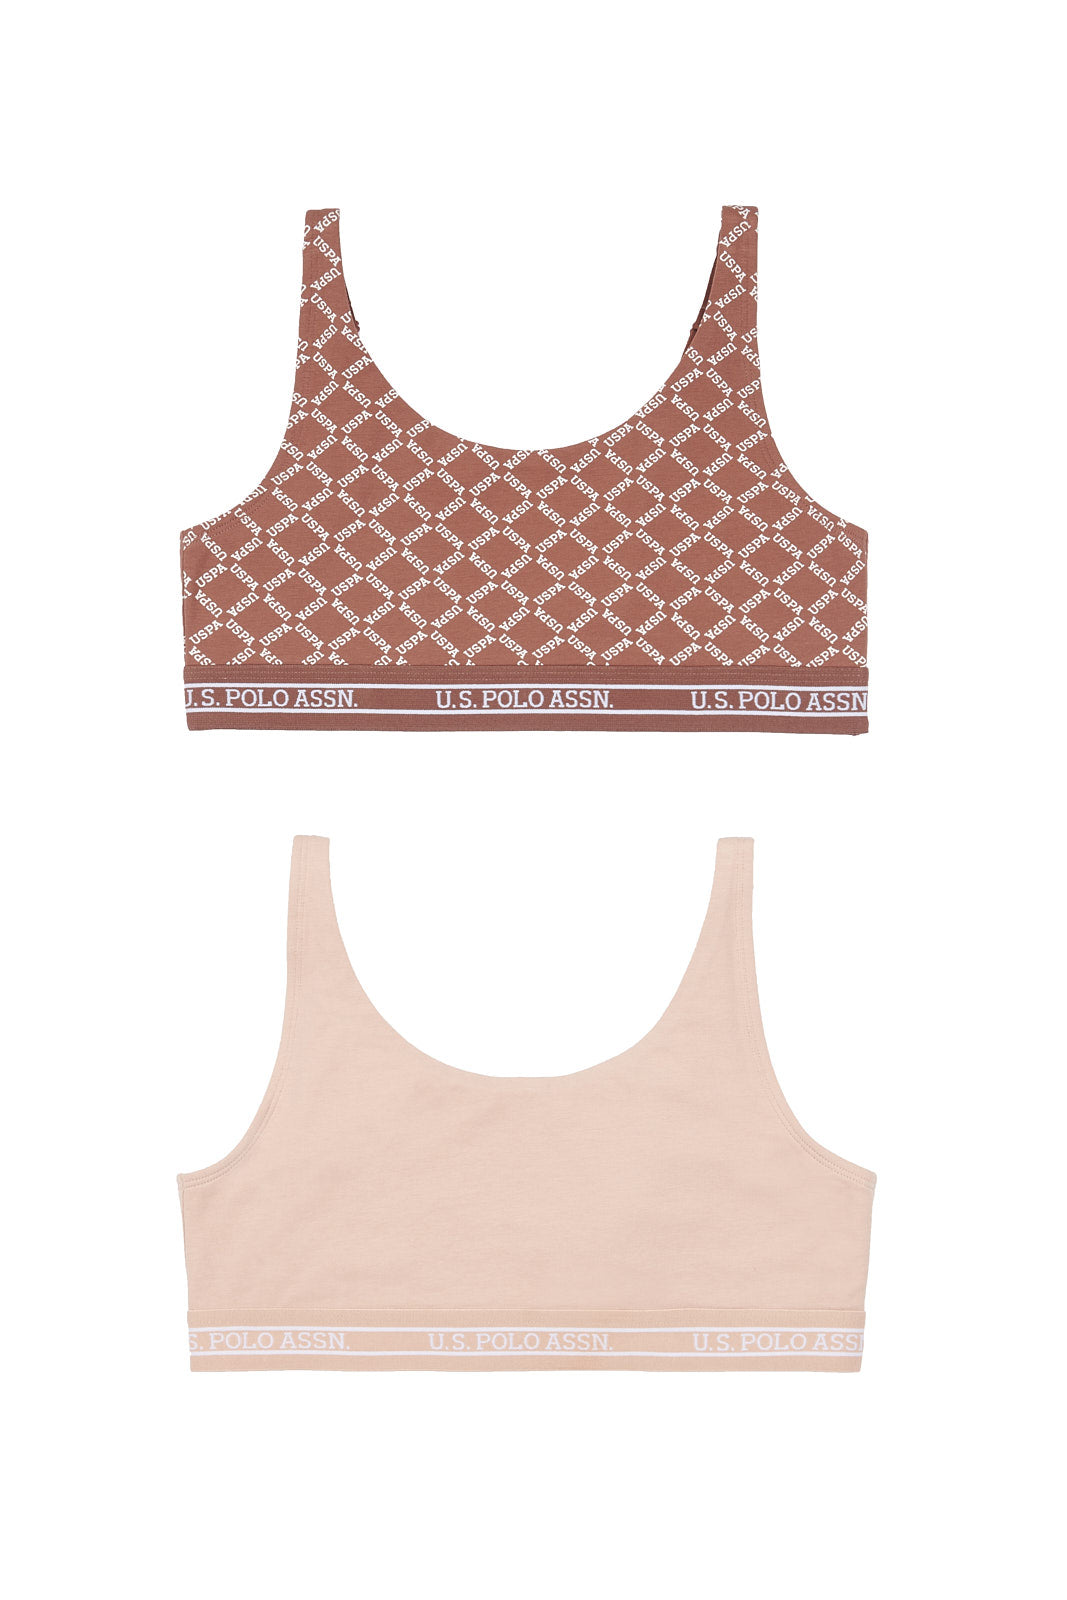 Womens 2 Pack Neutral Print Open Back Bralette in Rugby Tan